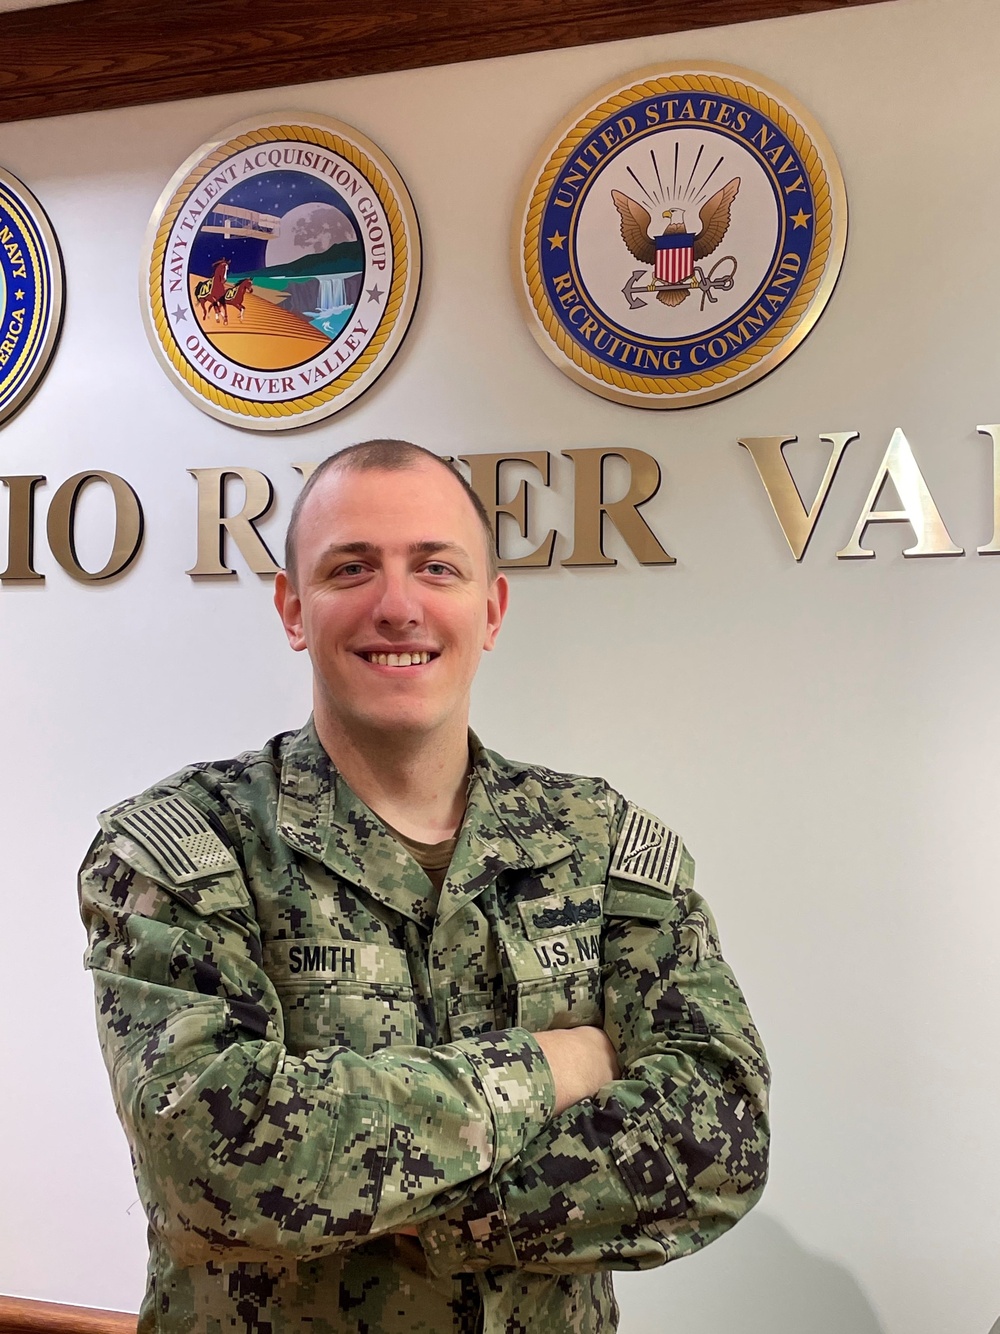 Ohio Sailor Finds Joy in Recruiting at Home